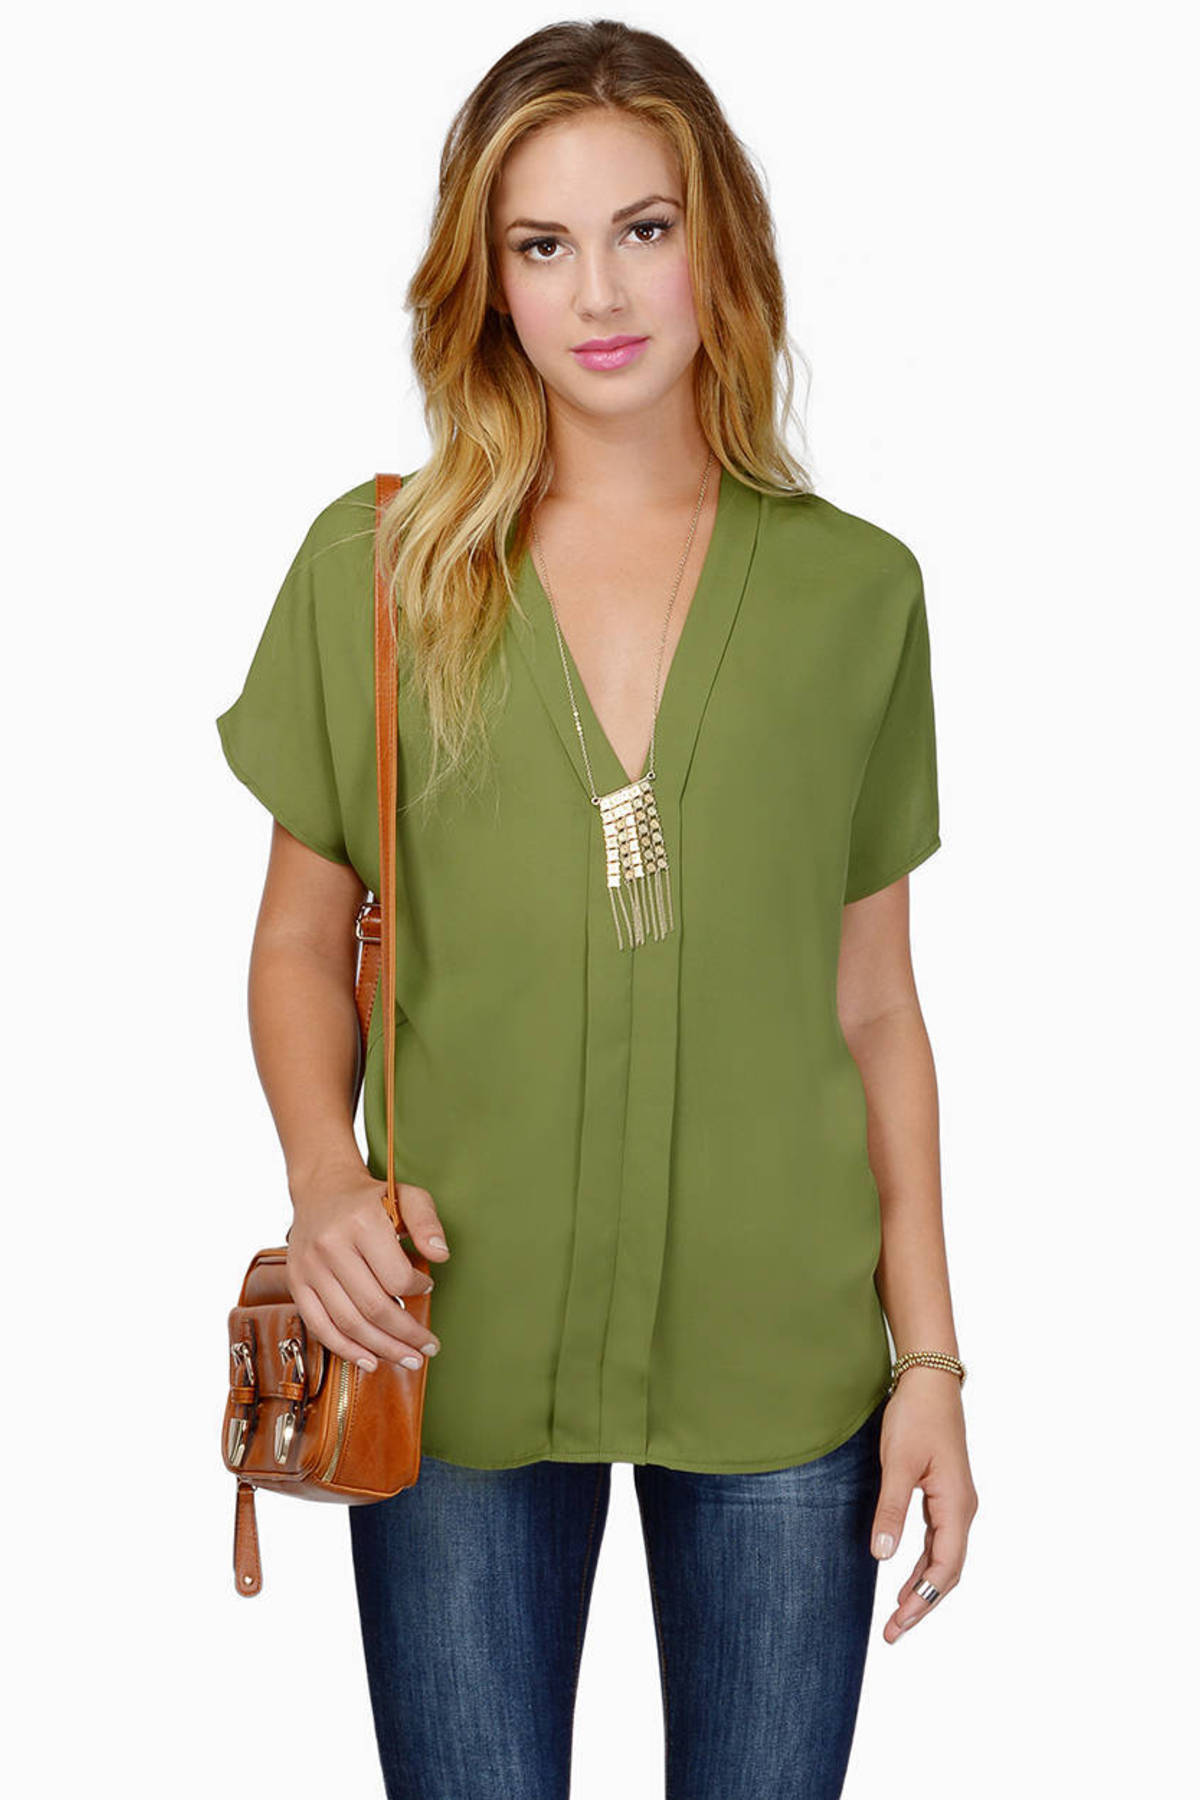 Olive Blouse - green Blouse - Short Sleeve Blouse - Olive Top